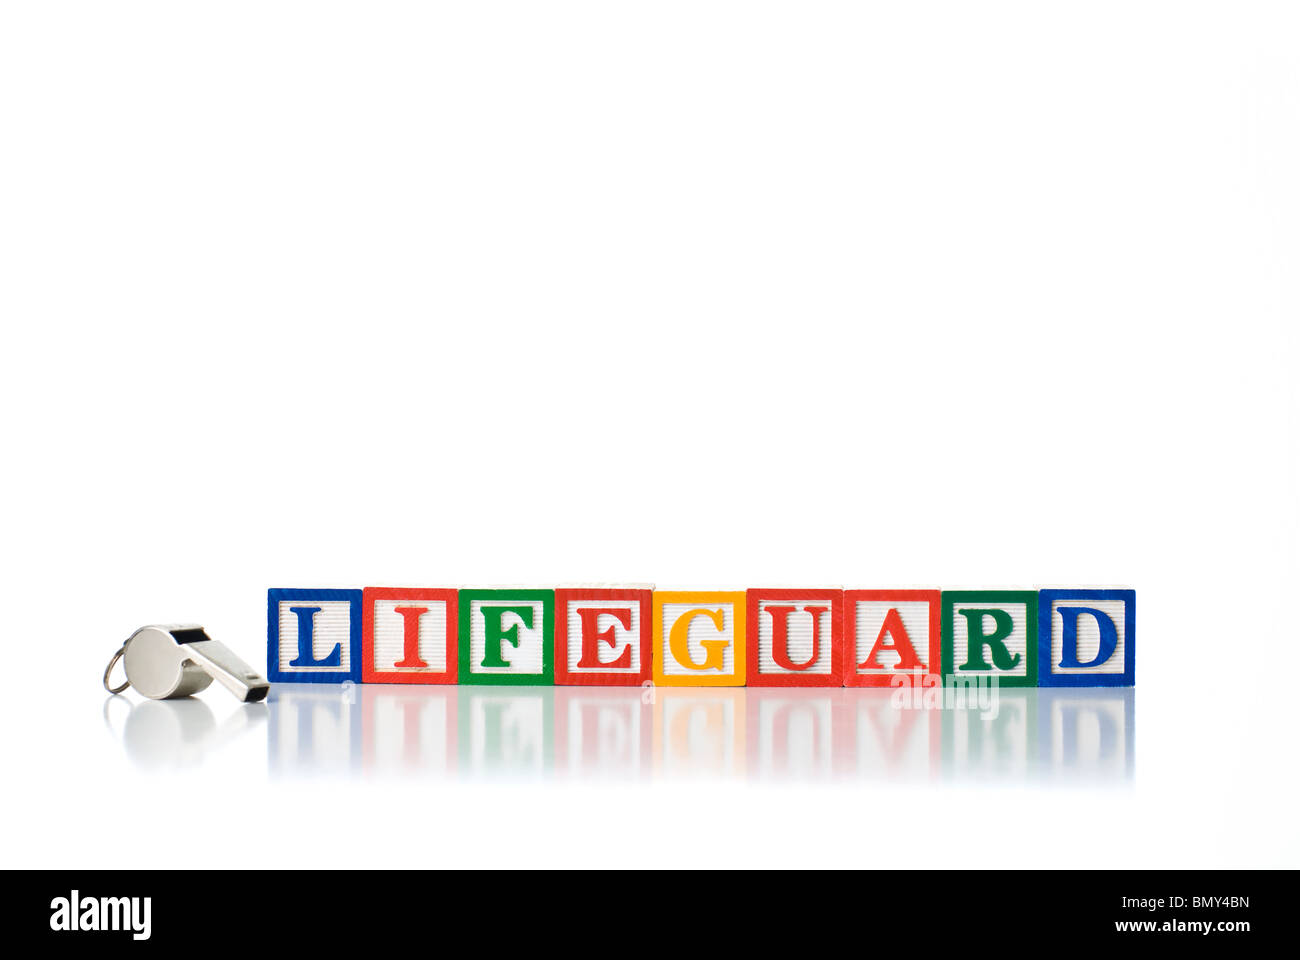 Colorful children's blocks spelling LIFEGUARD with a metal whistle Stock Photo